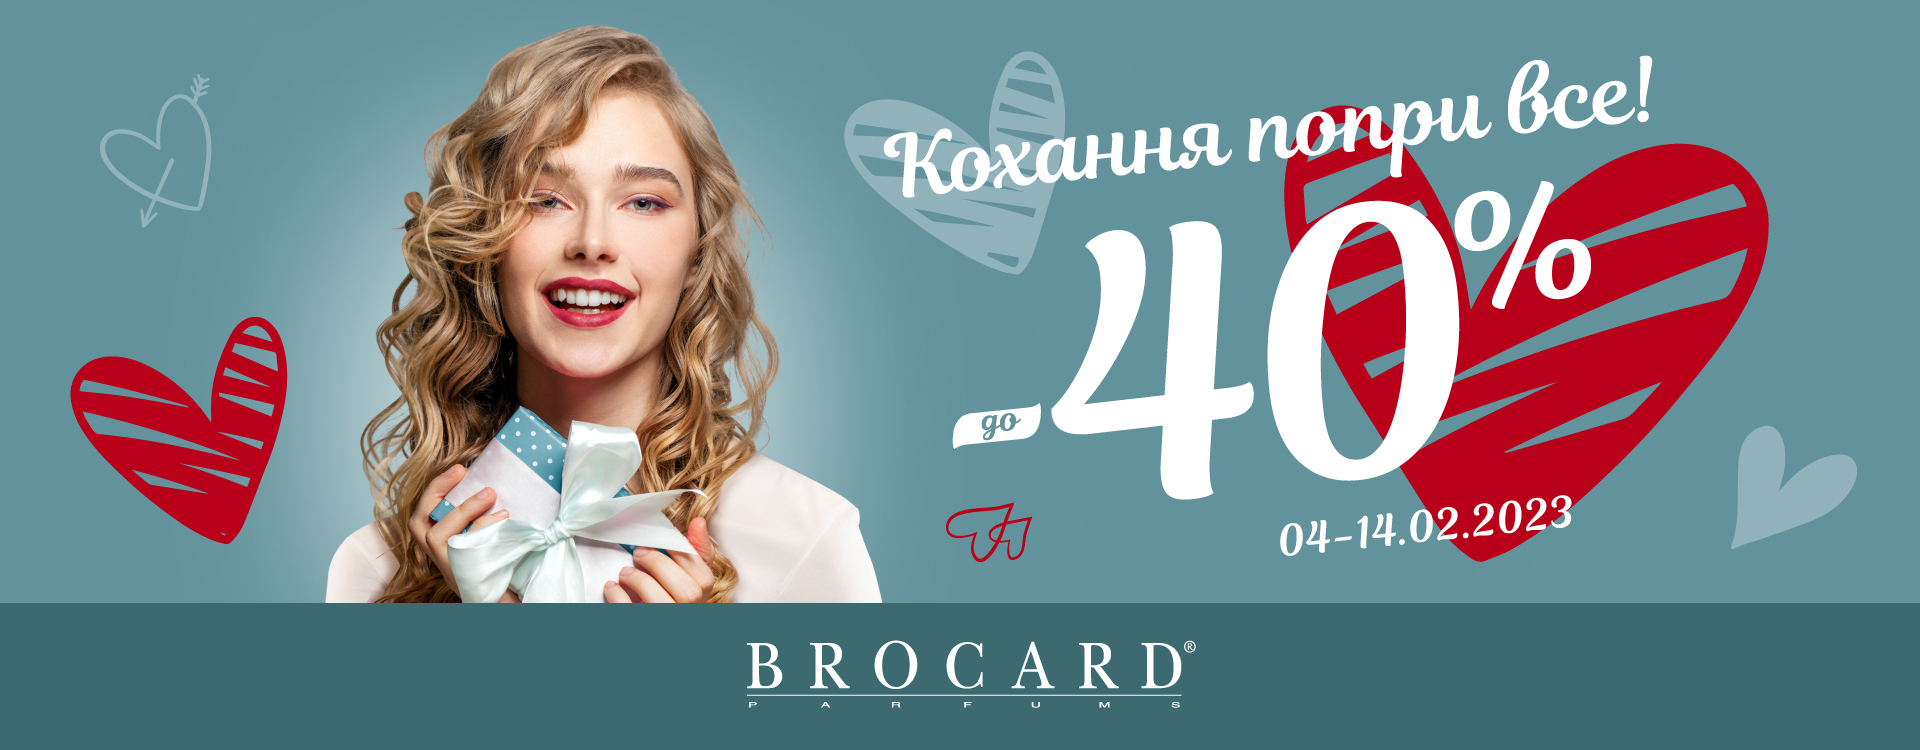 Up to 40% off for Valentine's Day at BROCARD